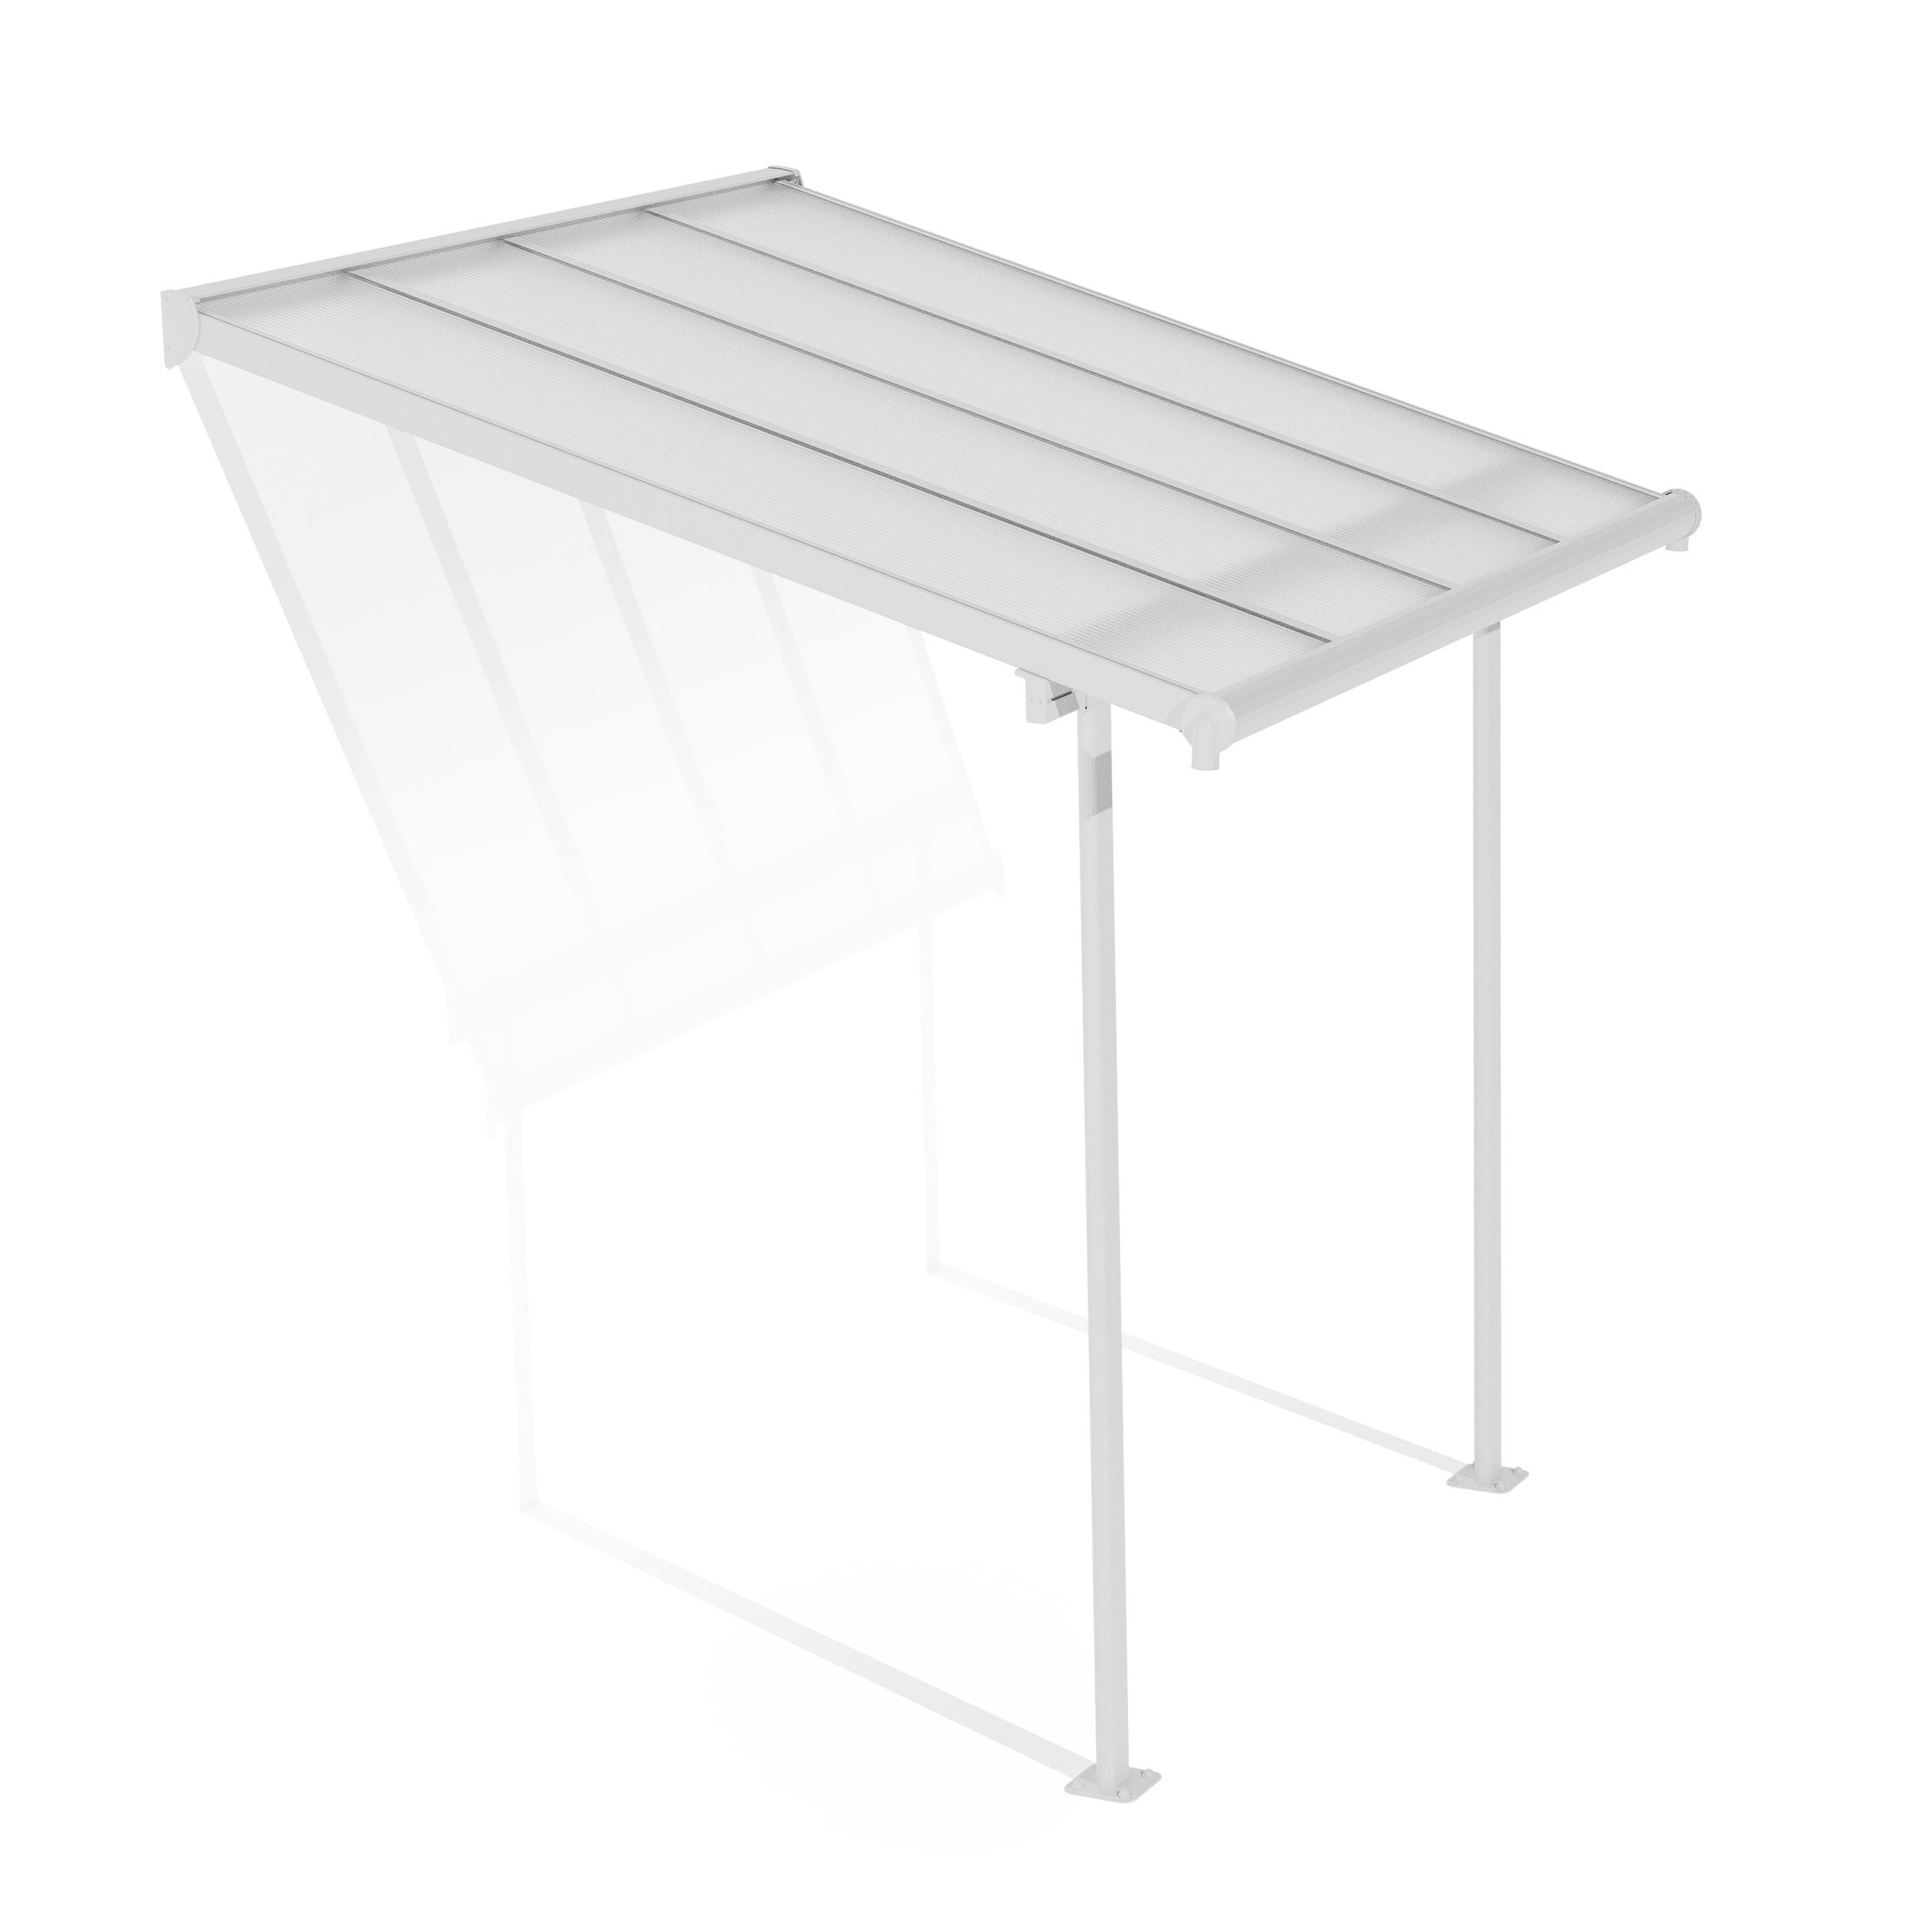 Palram - Canopia White Patio cover (H)3000mm (W)2245mm (D)2280mm